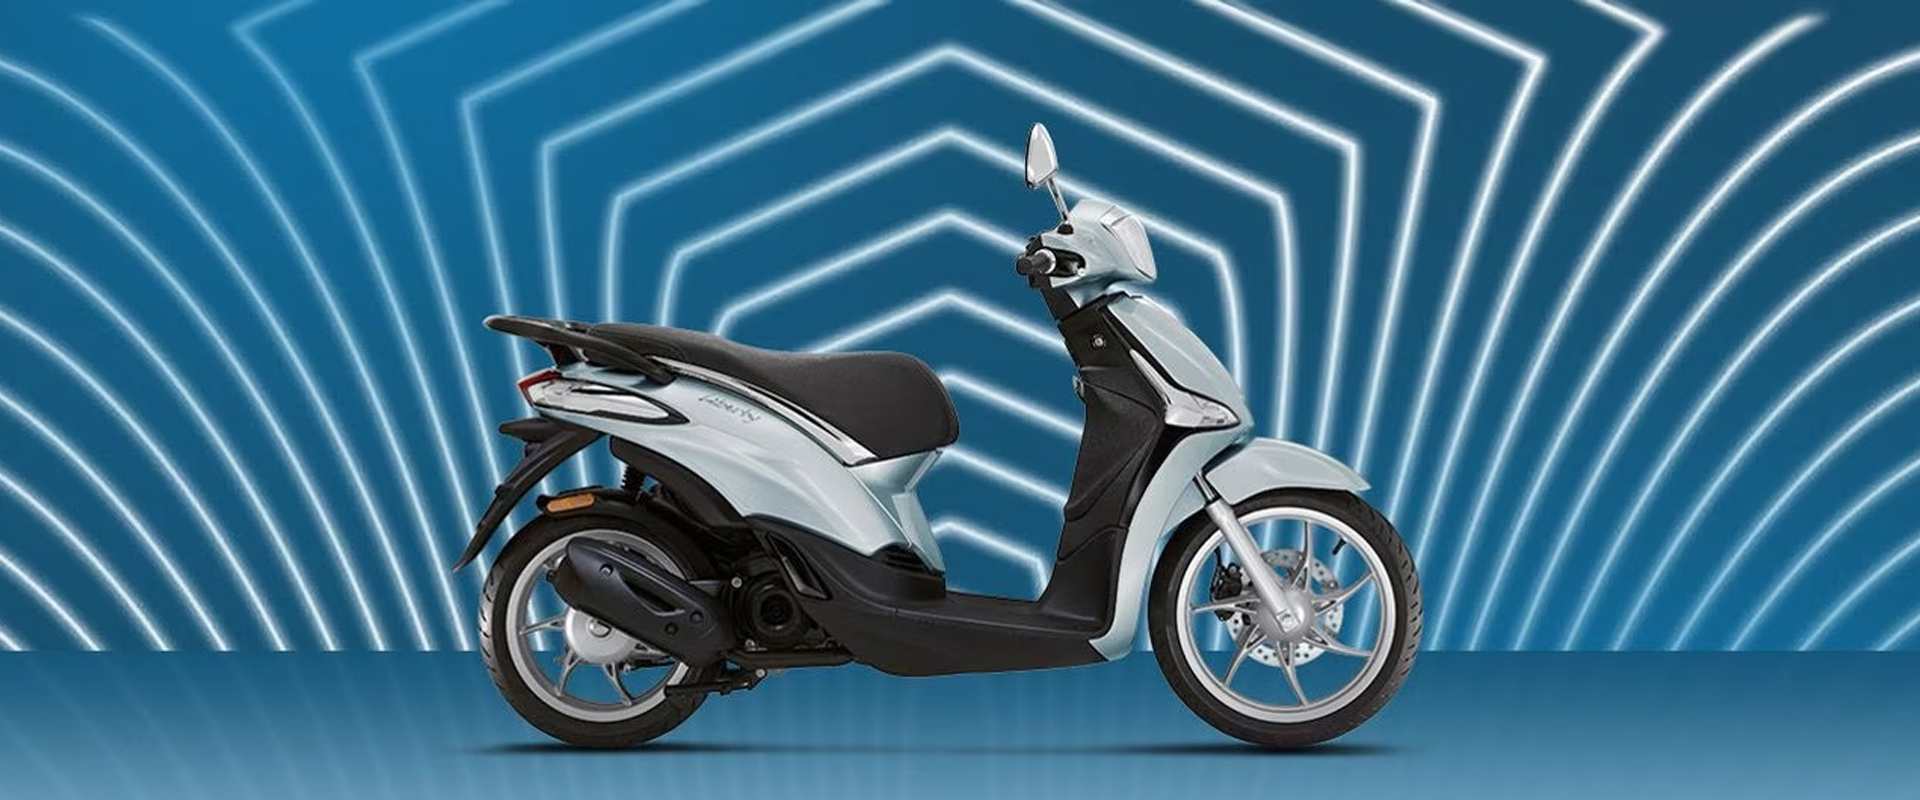 Piaggio Liberty 125 yours with 300€ discount and free insurance*.